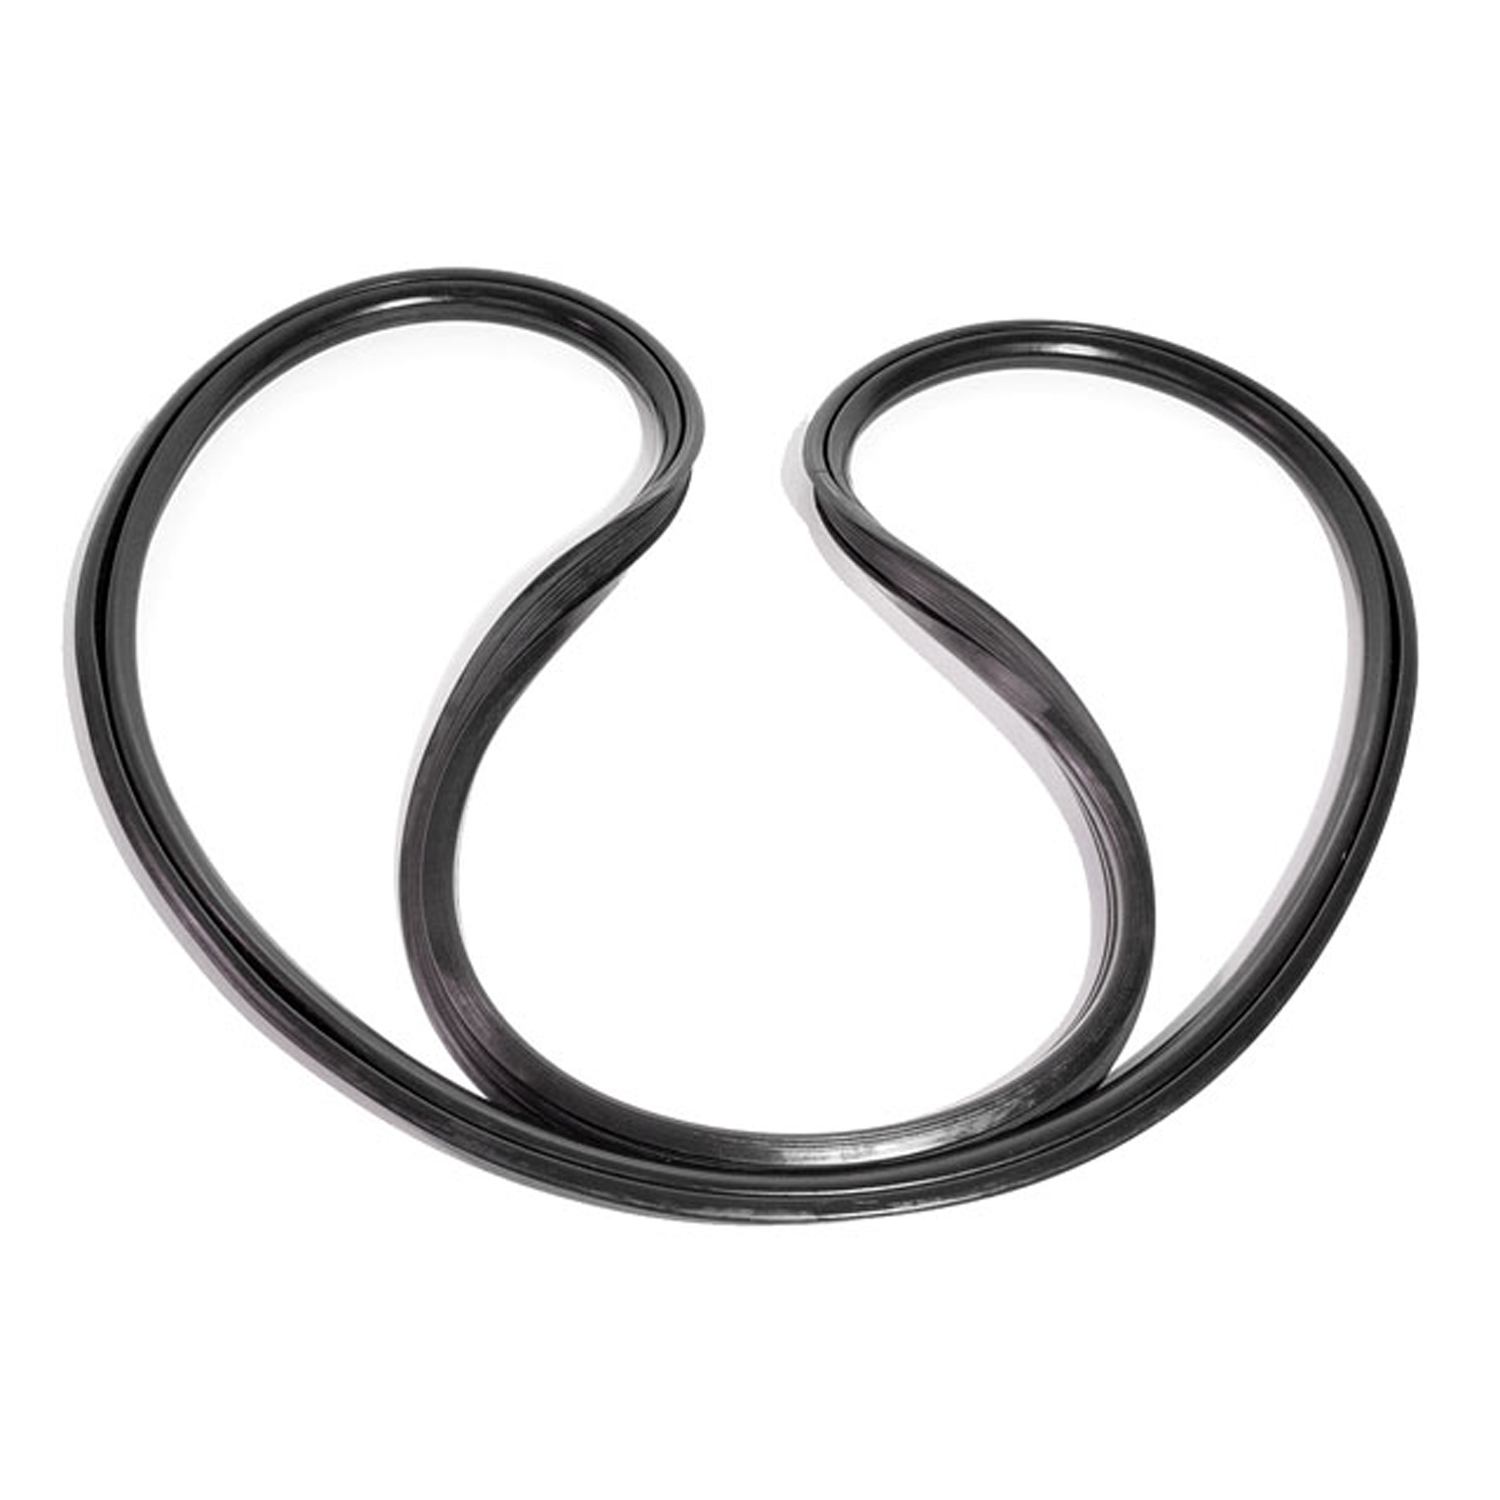 1953 Oldsmobile 98 Vulcanized Windshield Seal.  For hardtops and convertibles-VWS 7300